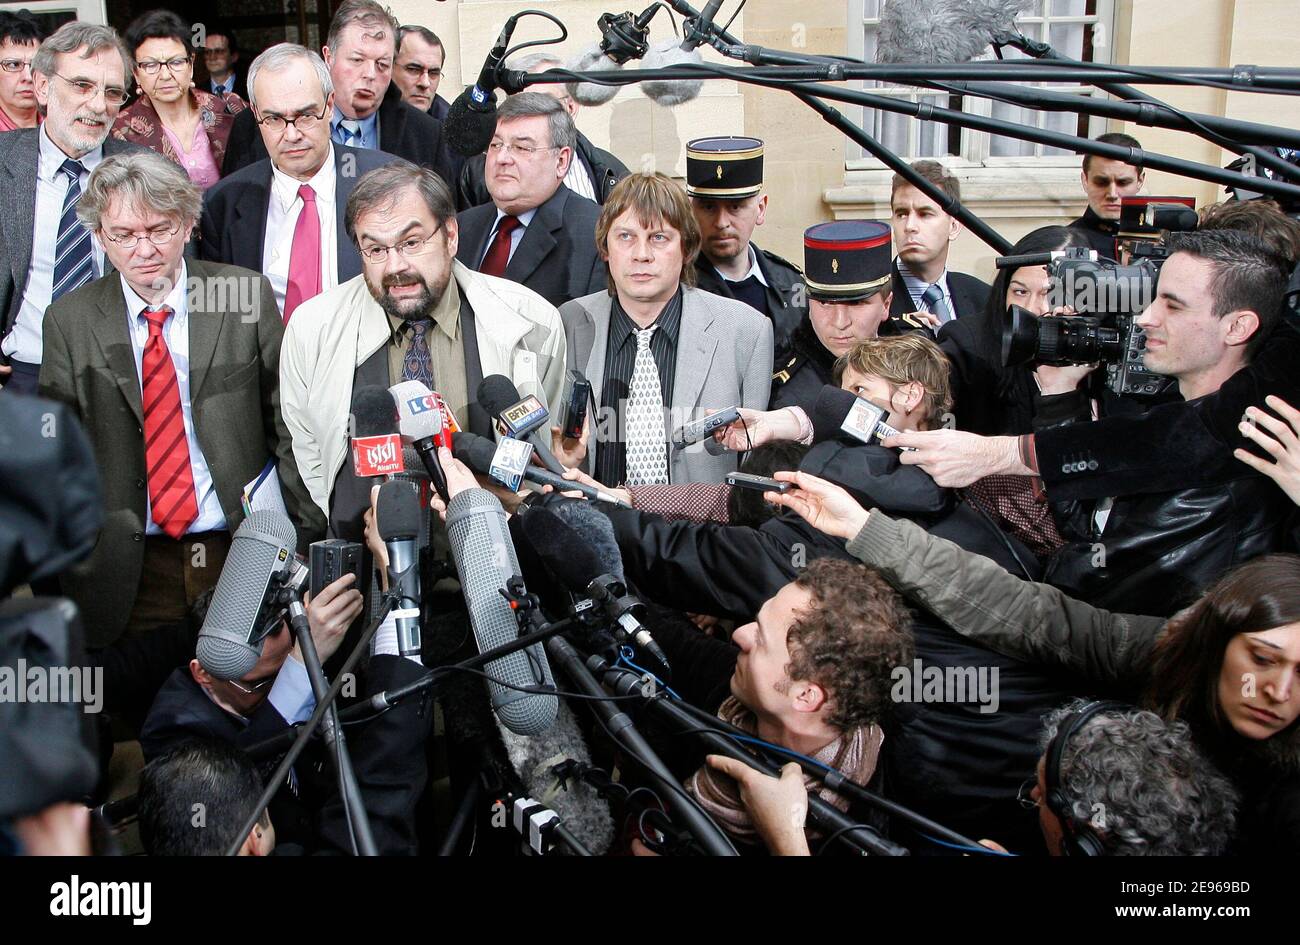 Unionists Bernard Thibault (CGT) (R), Francois Chereque (C), Jean-Claude Mailly (FO) (L), Jacques Voisin (2nd rowL) (CFTC), et Jean-Marc Icard (2nd Row C) (CFE-CGC) answer to journalists as they a meeting with French Prime Minister Dominique de Villepin in Paris, France, March 24, 2006. The prime minister met with unions for just over one hour, with both sides refusing to cede any ground. The unions say they will not hold talks with the government unless the law is revoked. De Villlepin has said he won't withdraw, suspend or change the law.. Photo by Mehdi Taamallah/ABACAPRESS.COM Stock Photo